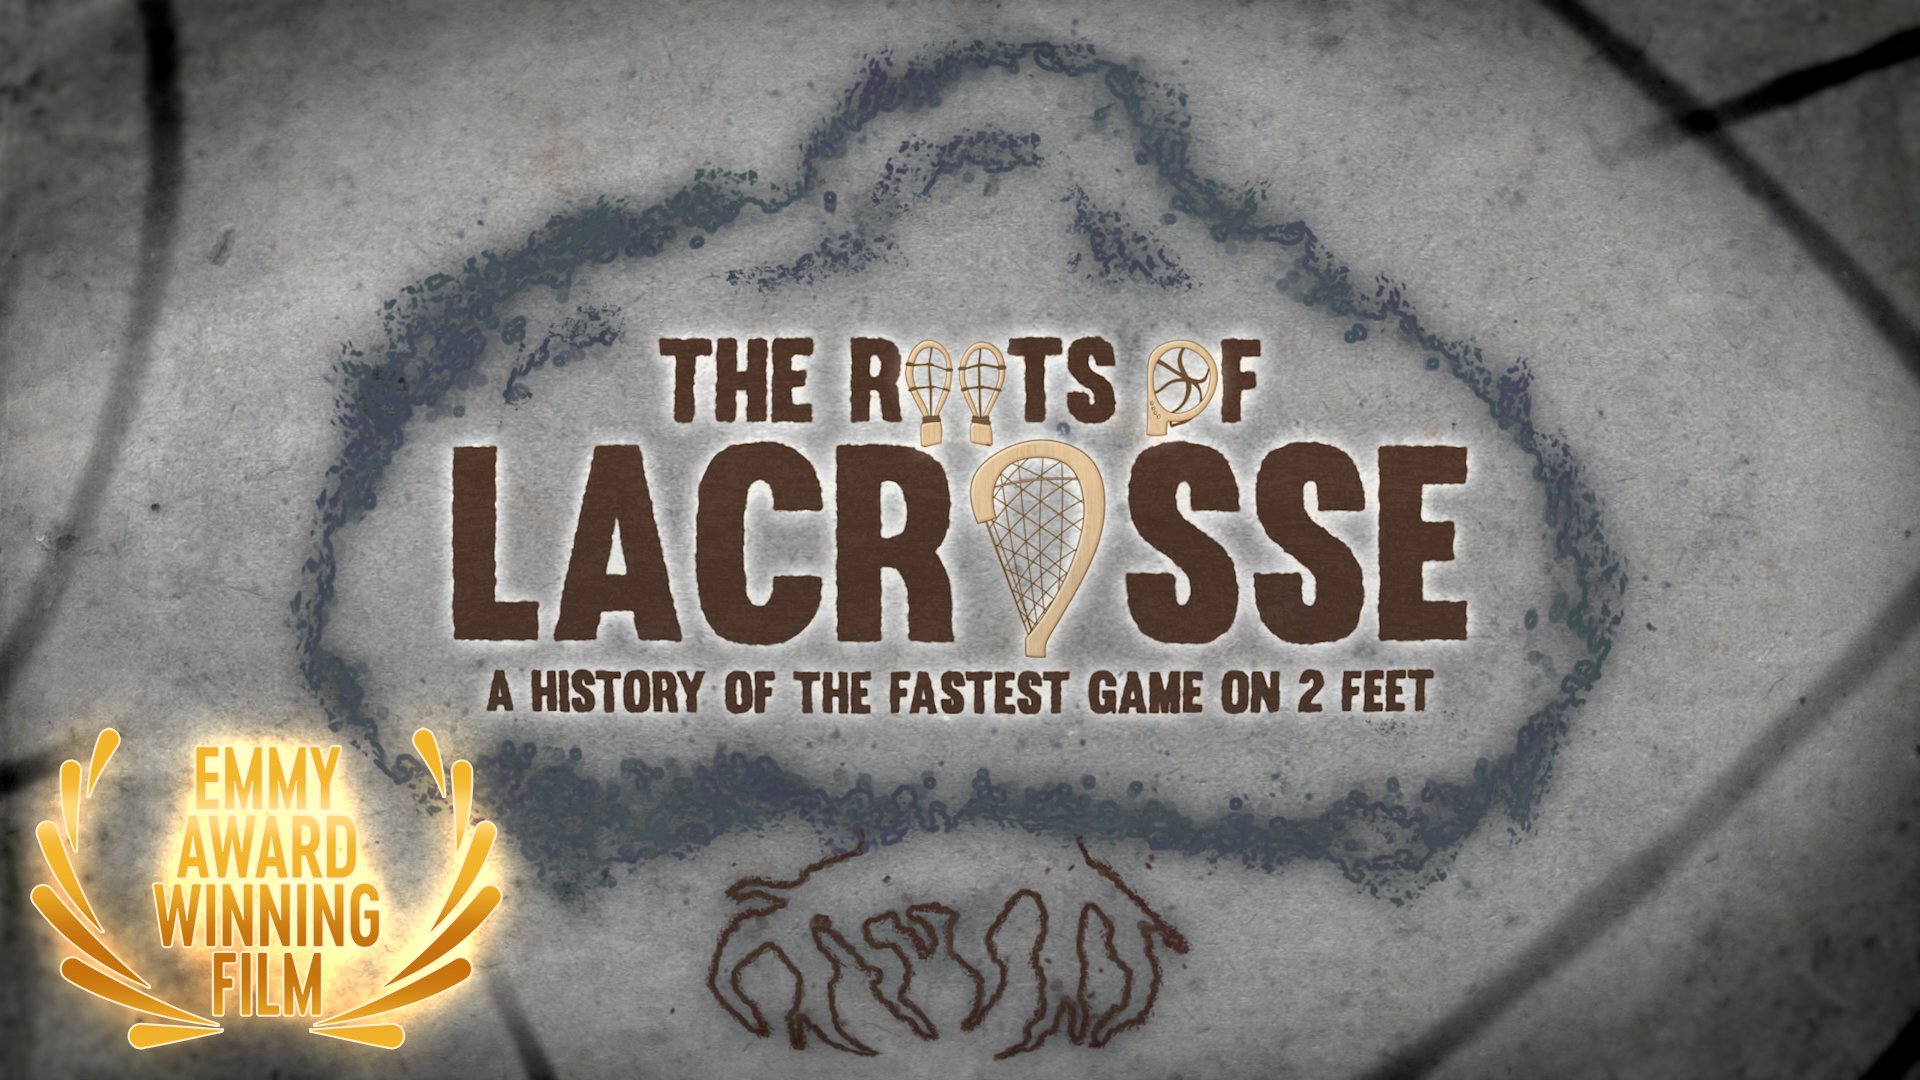 The Roots of Lacrosse